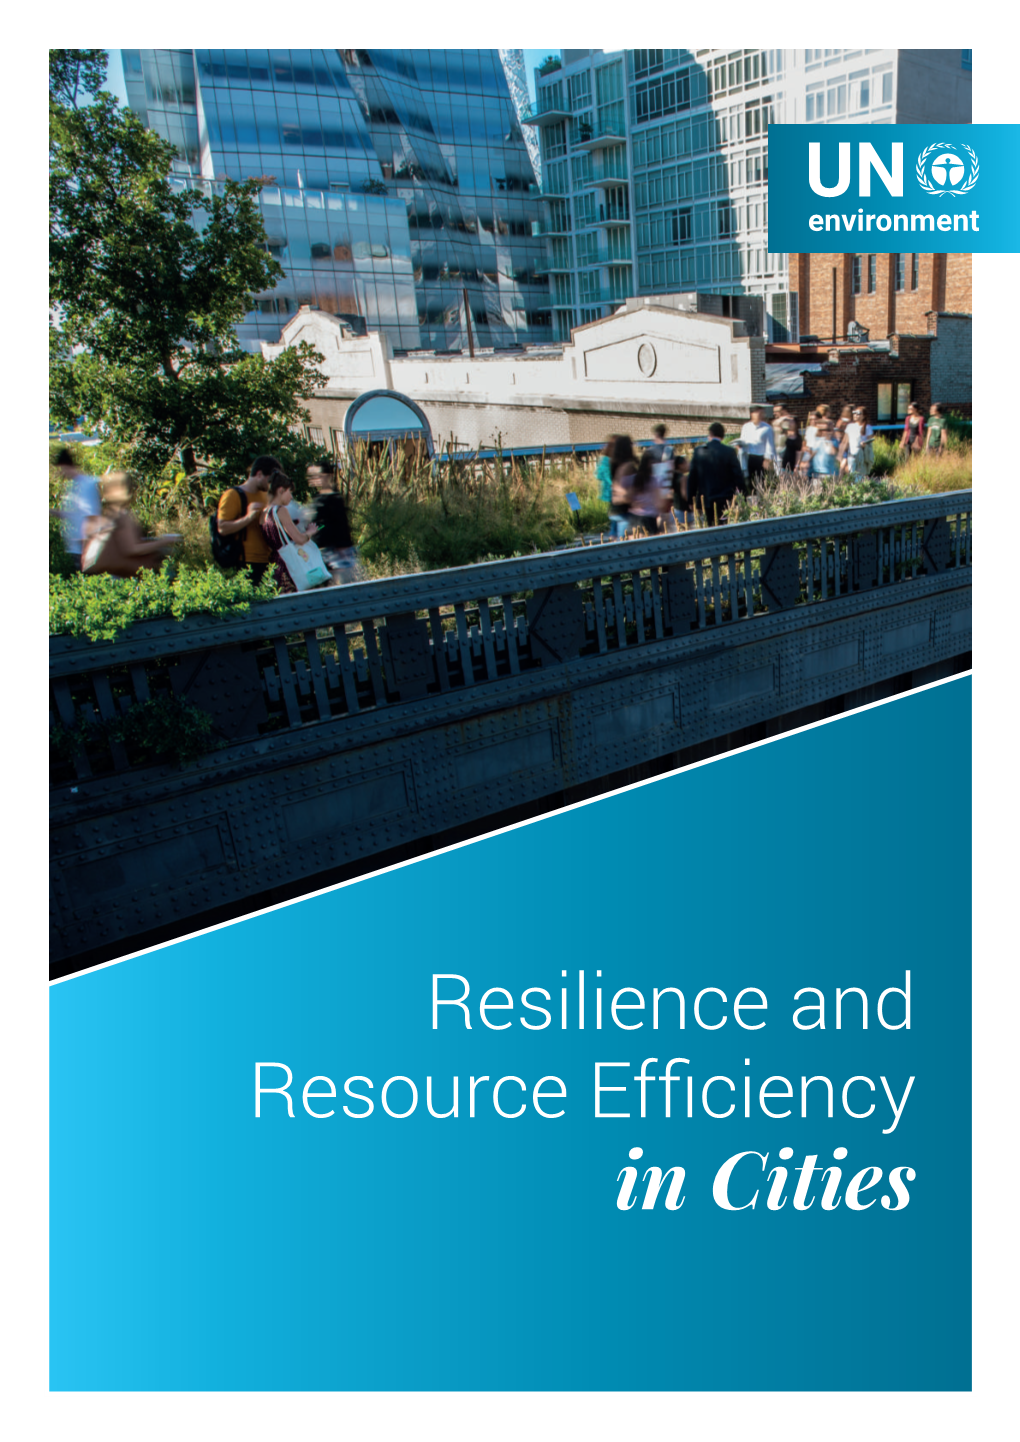 Resilience and Resource Efficiency in Cities